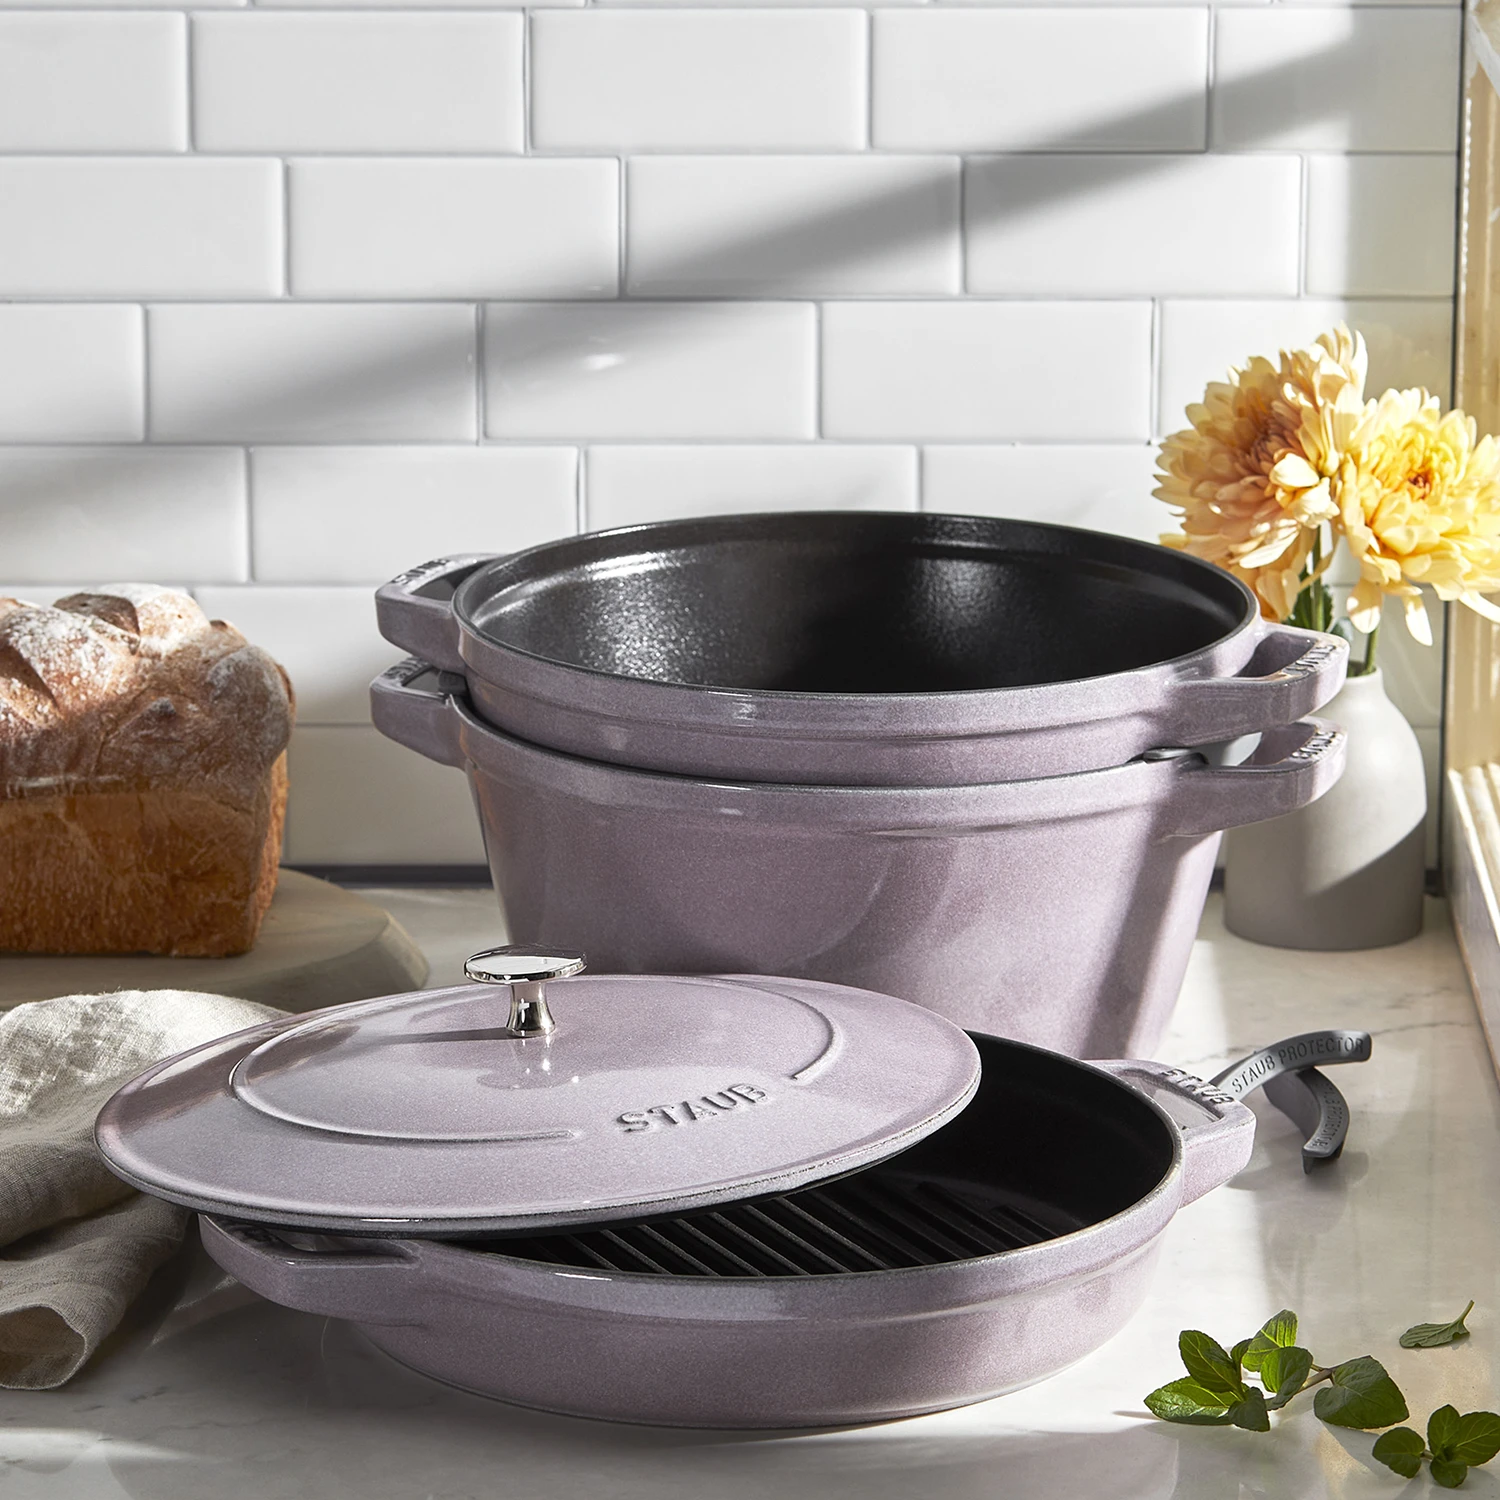 https://www.homethreads.com/files/zwilling/145526117-staub-cast-iron-set-4-pc-stackable-space-saving-cookware-set-dutch-oven-with-universal-lid-made-in-france-lilac-16.webp